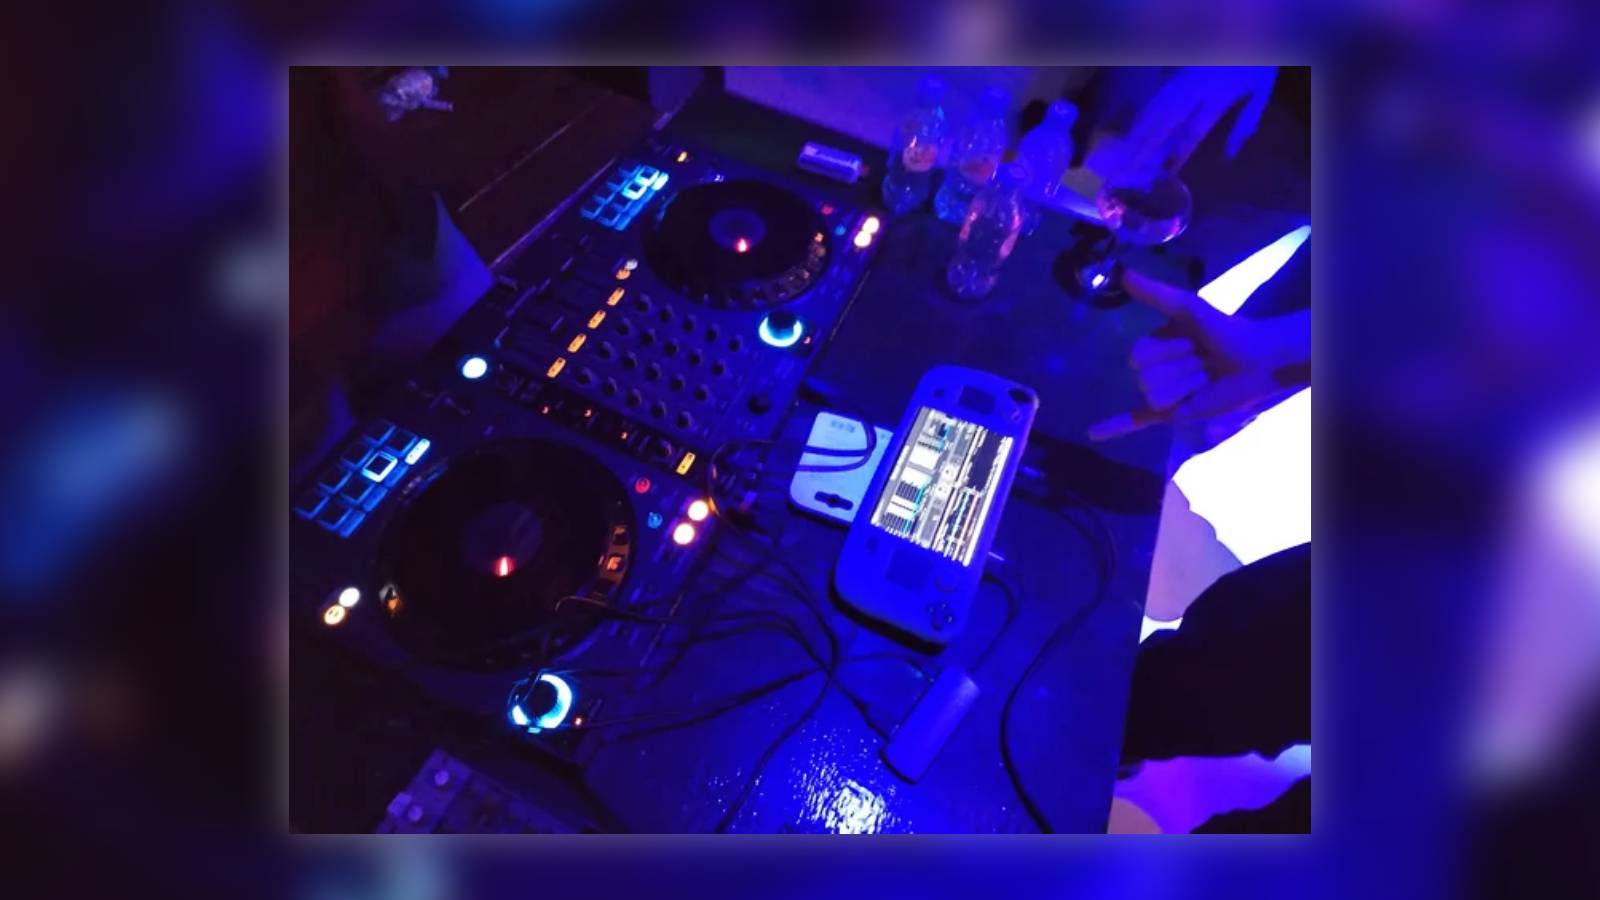 Image posted on r/Steam Deck of the handheld being used in a DJ set.